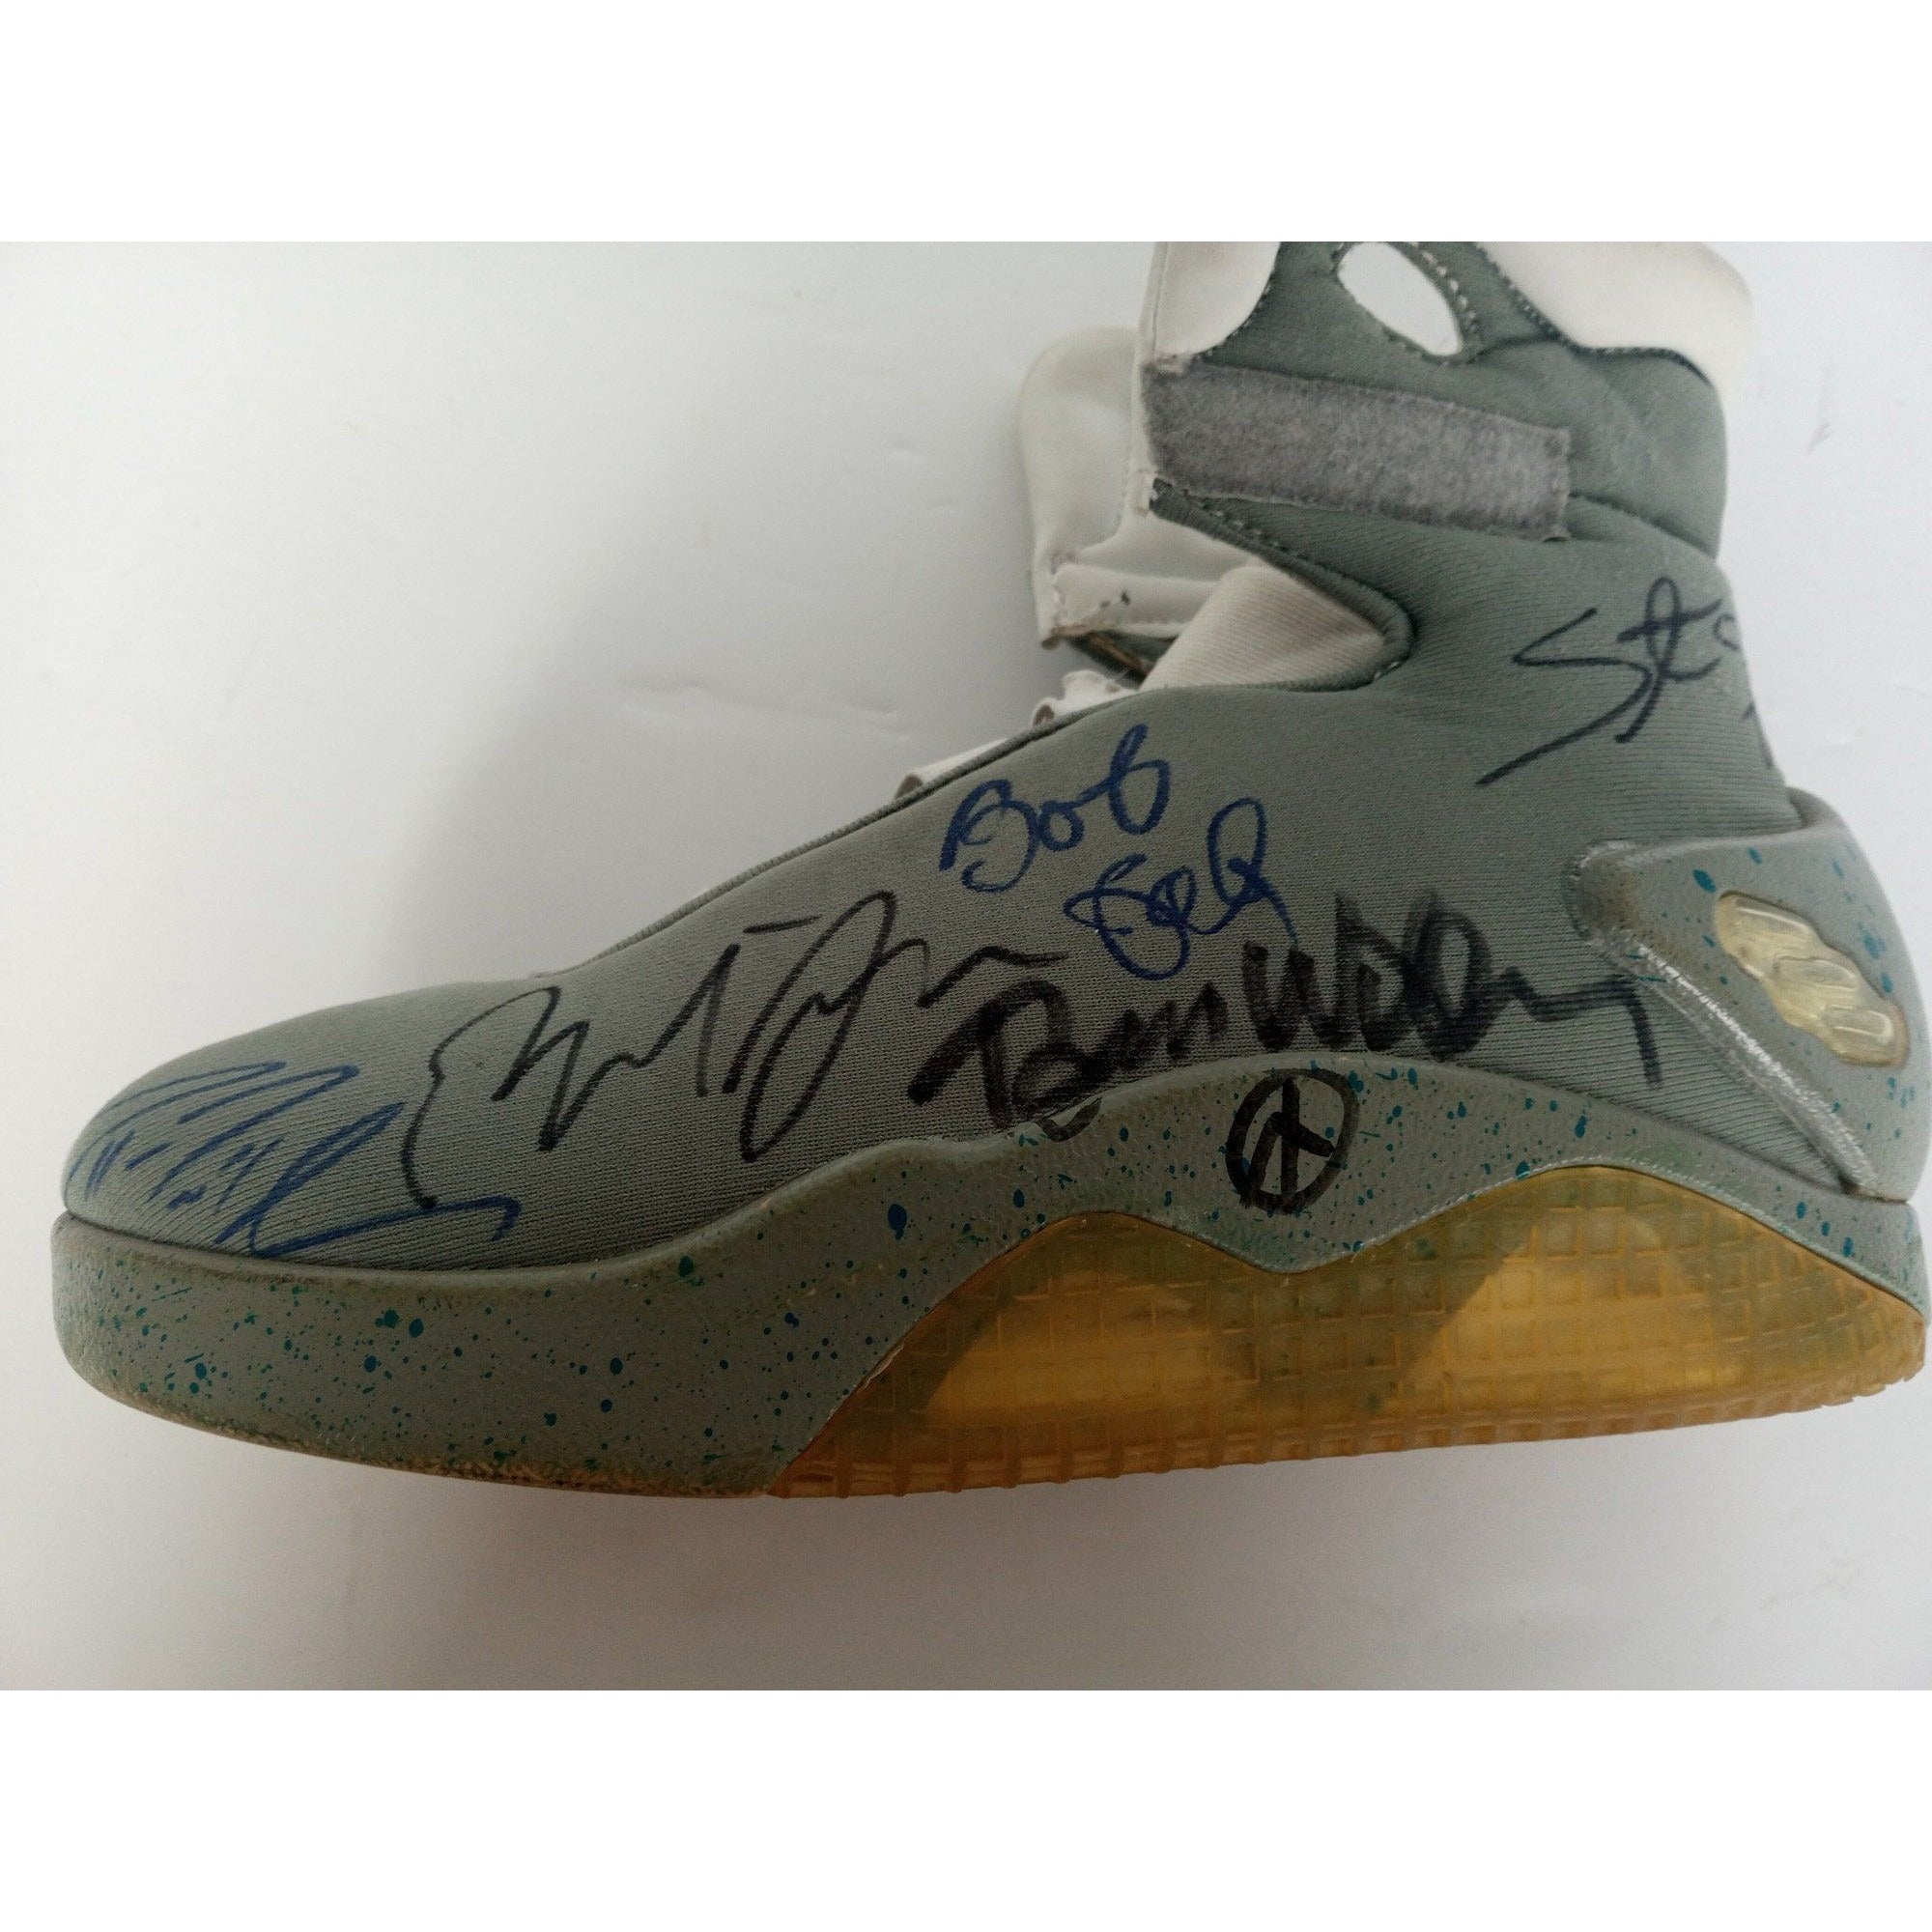 Michael J. Fox, Steven Spielberg, Back to the Future cast shoe signed with proof